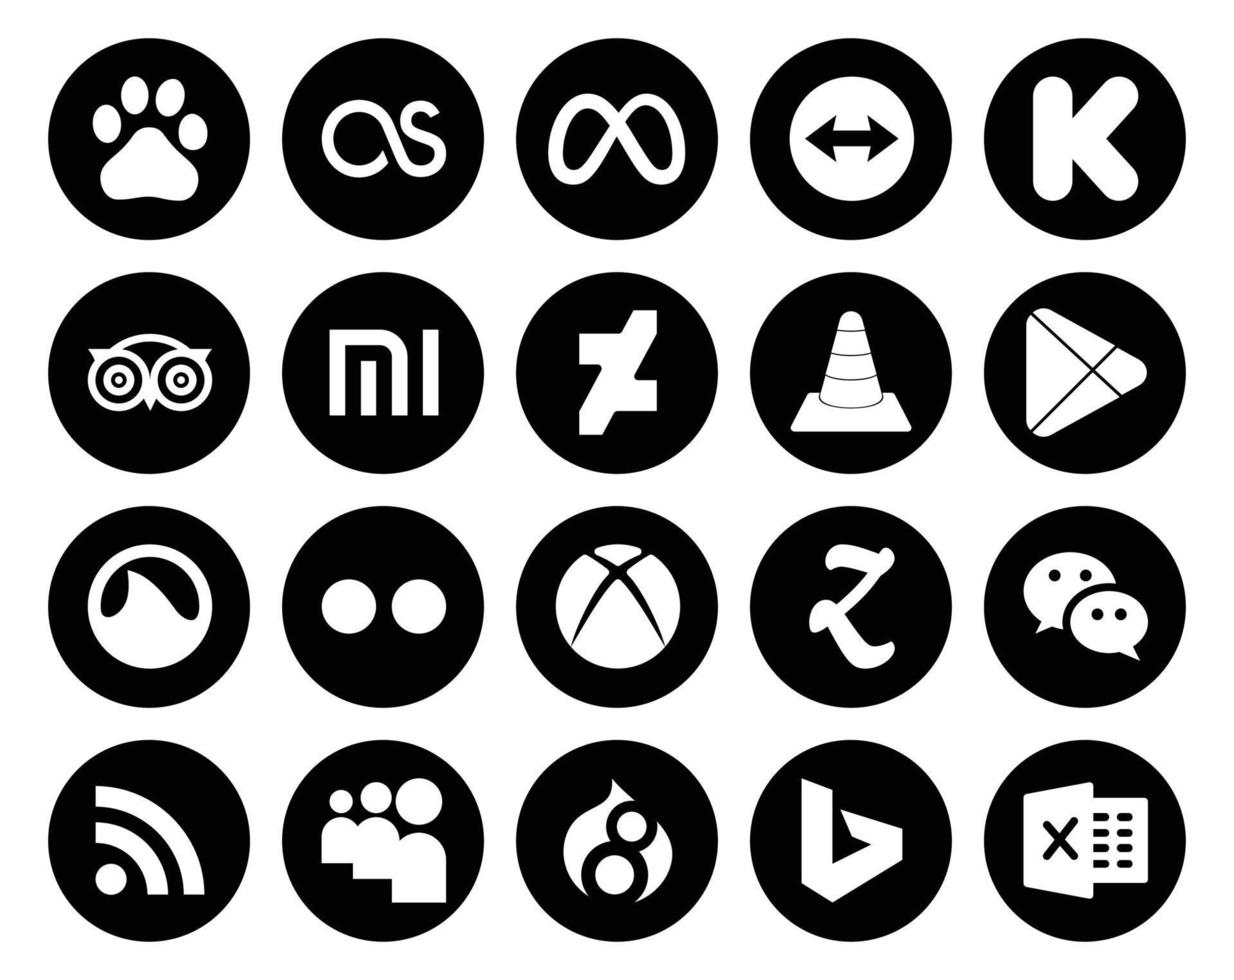 20 Social Media Icon Pack inklusive Xbox Grooveshark Xiaomi Apps Player vektor